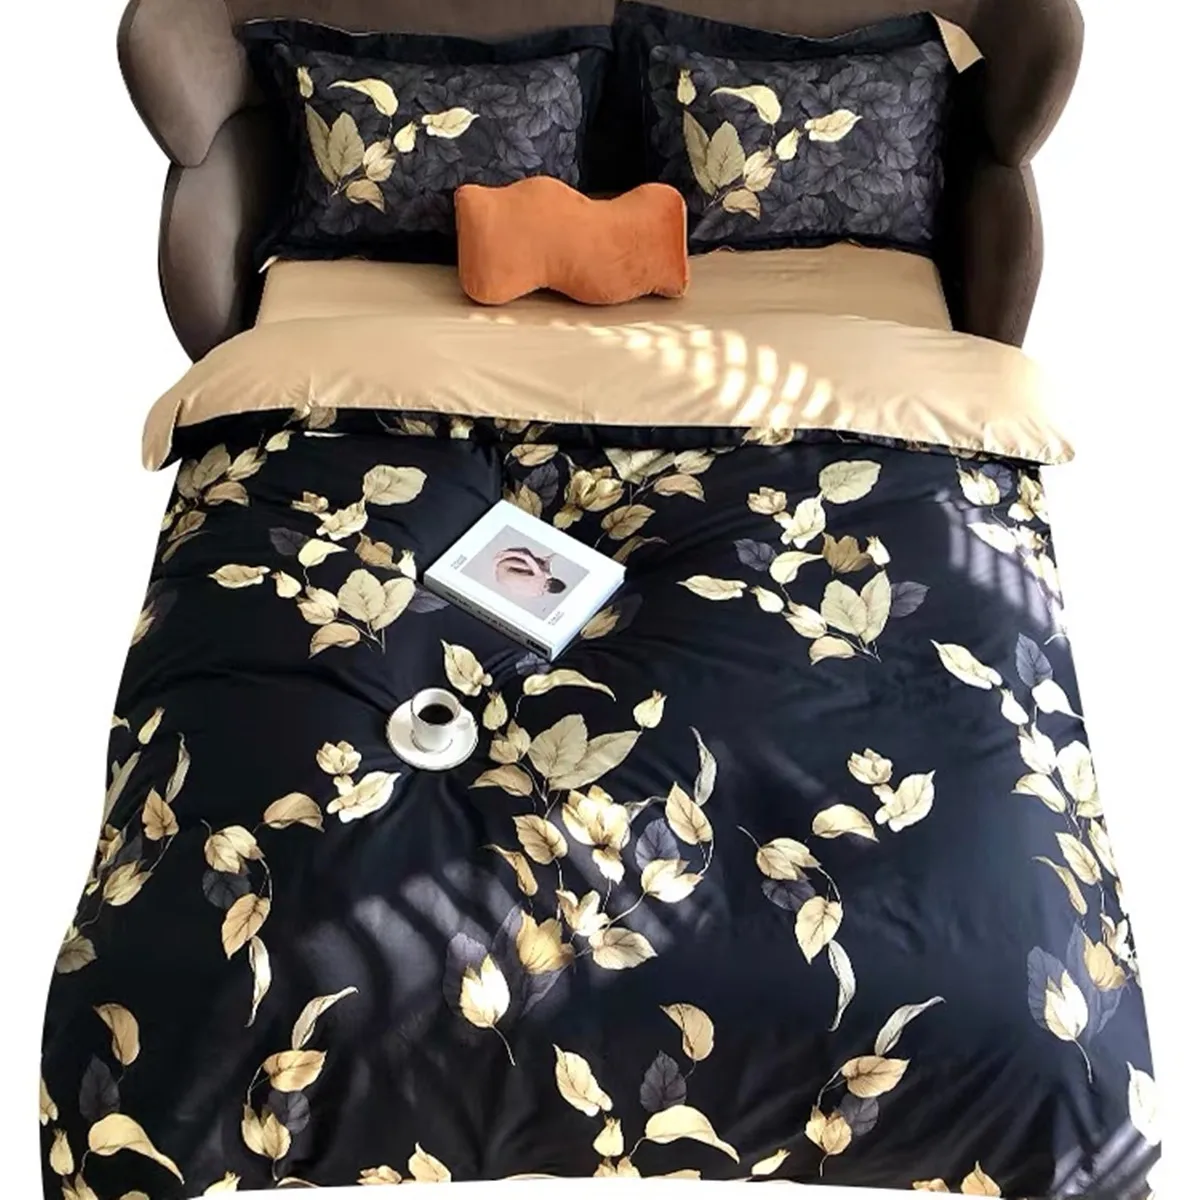 

New Black Gold Cotton Longstaple Cotton 4-piece Pastoral Printed Nude Cotton Bed Sheet And Quilt Cover Bedding